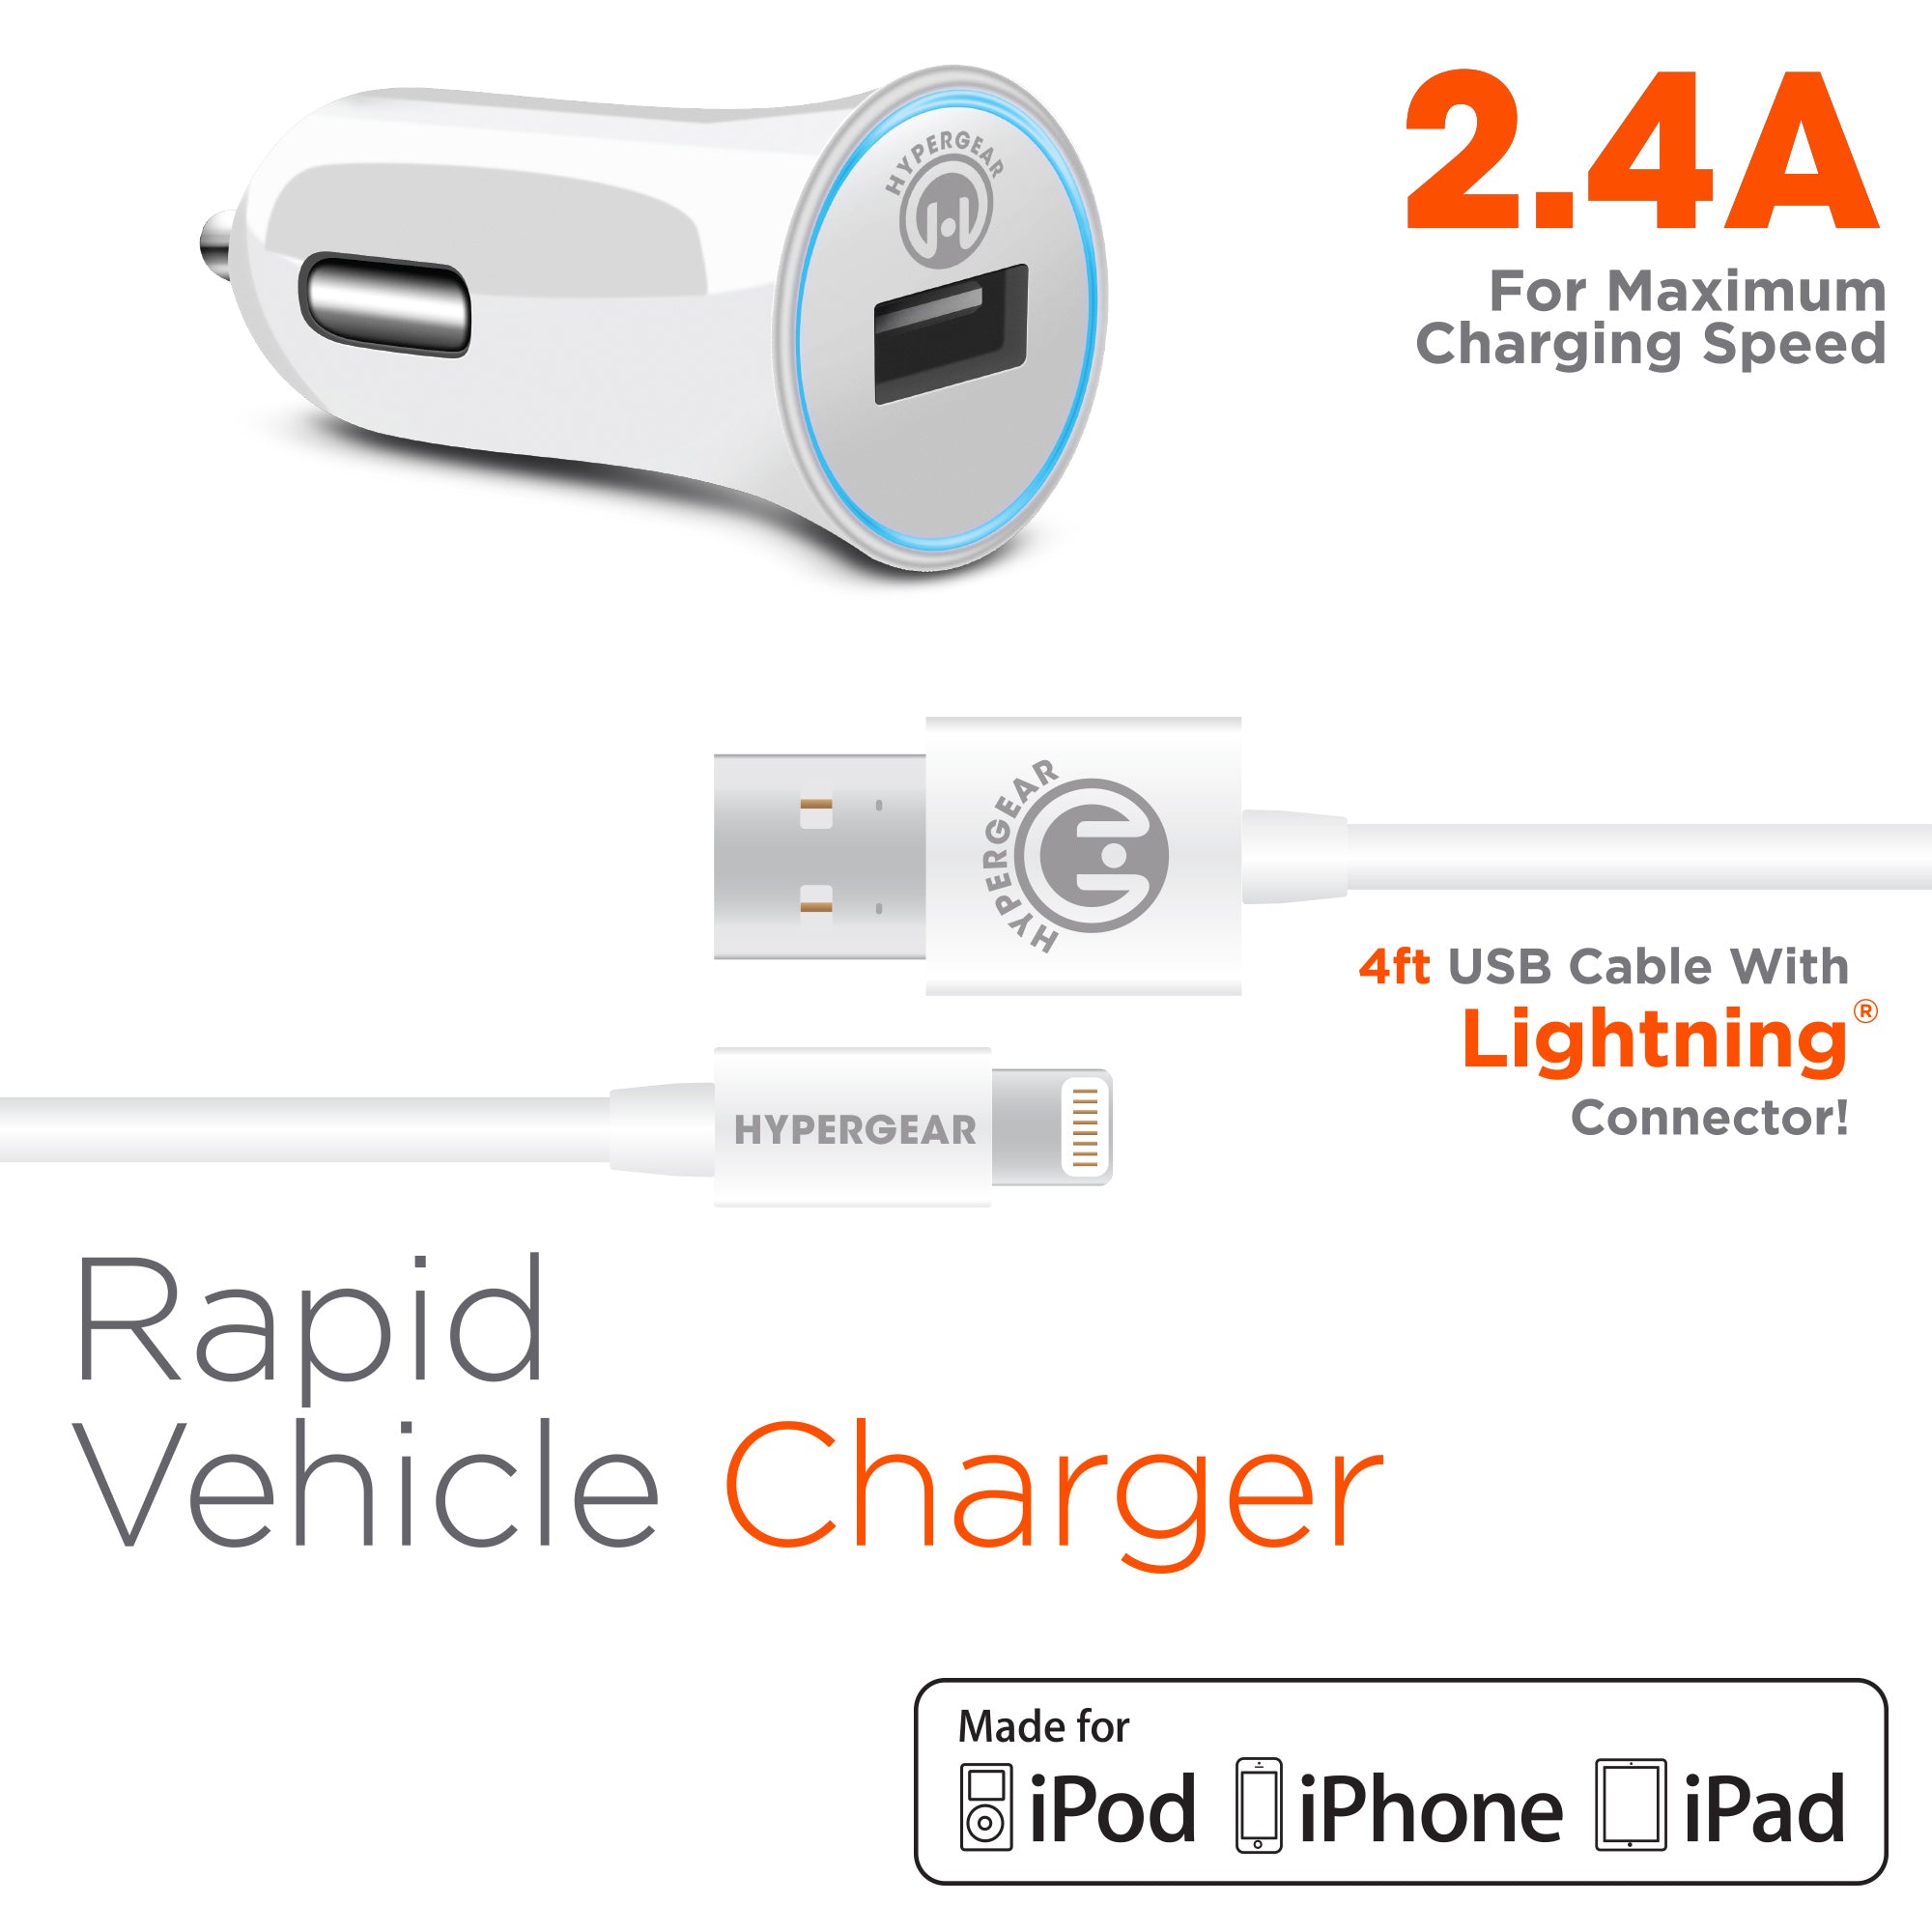 HyperGear 2.4A Rapid Vehicle Charger with 4ft MFi Lightning Cable - White –  HYPERGEAR